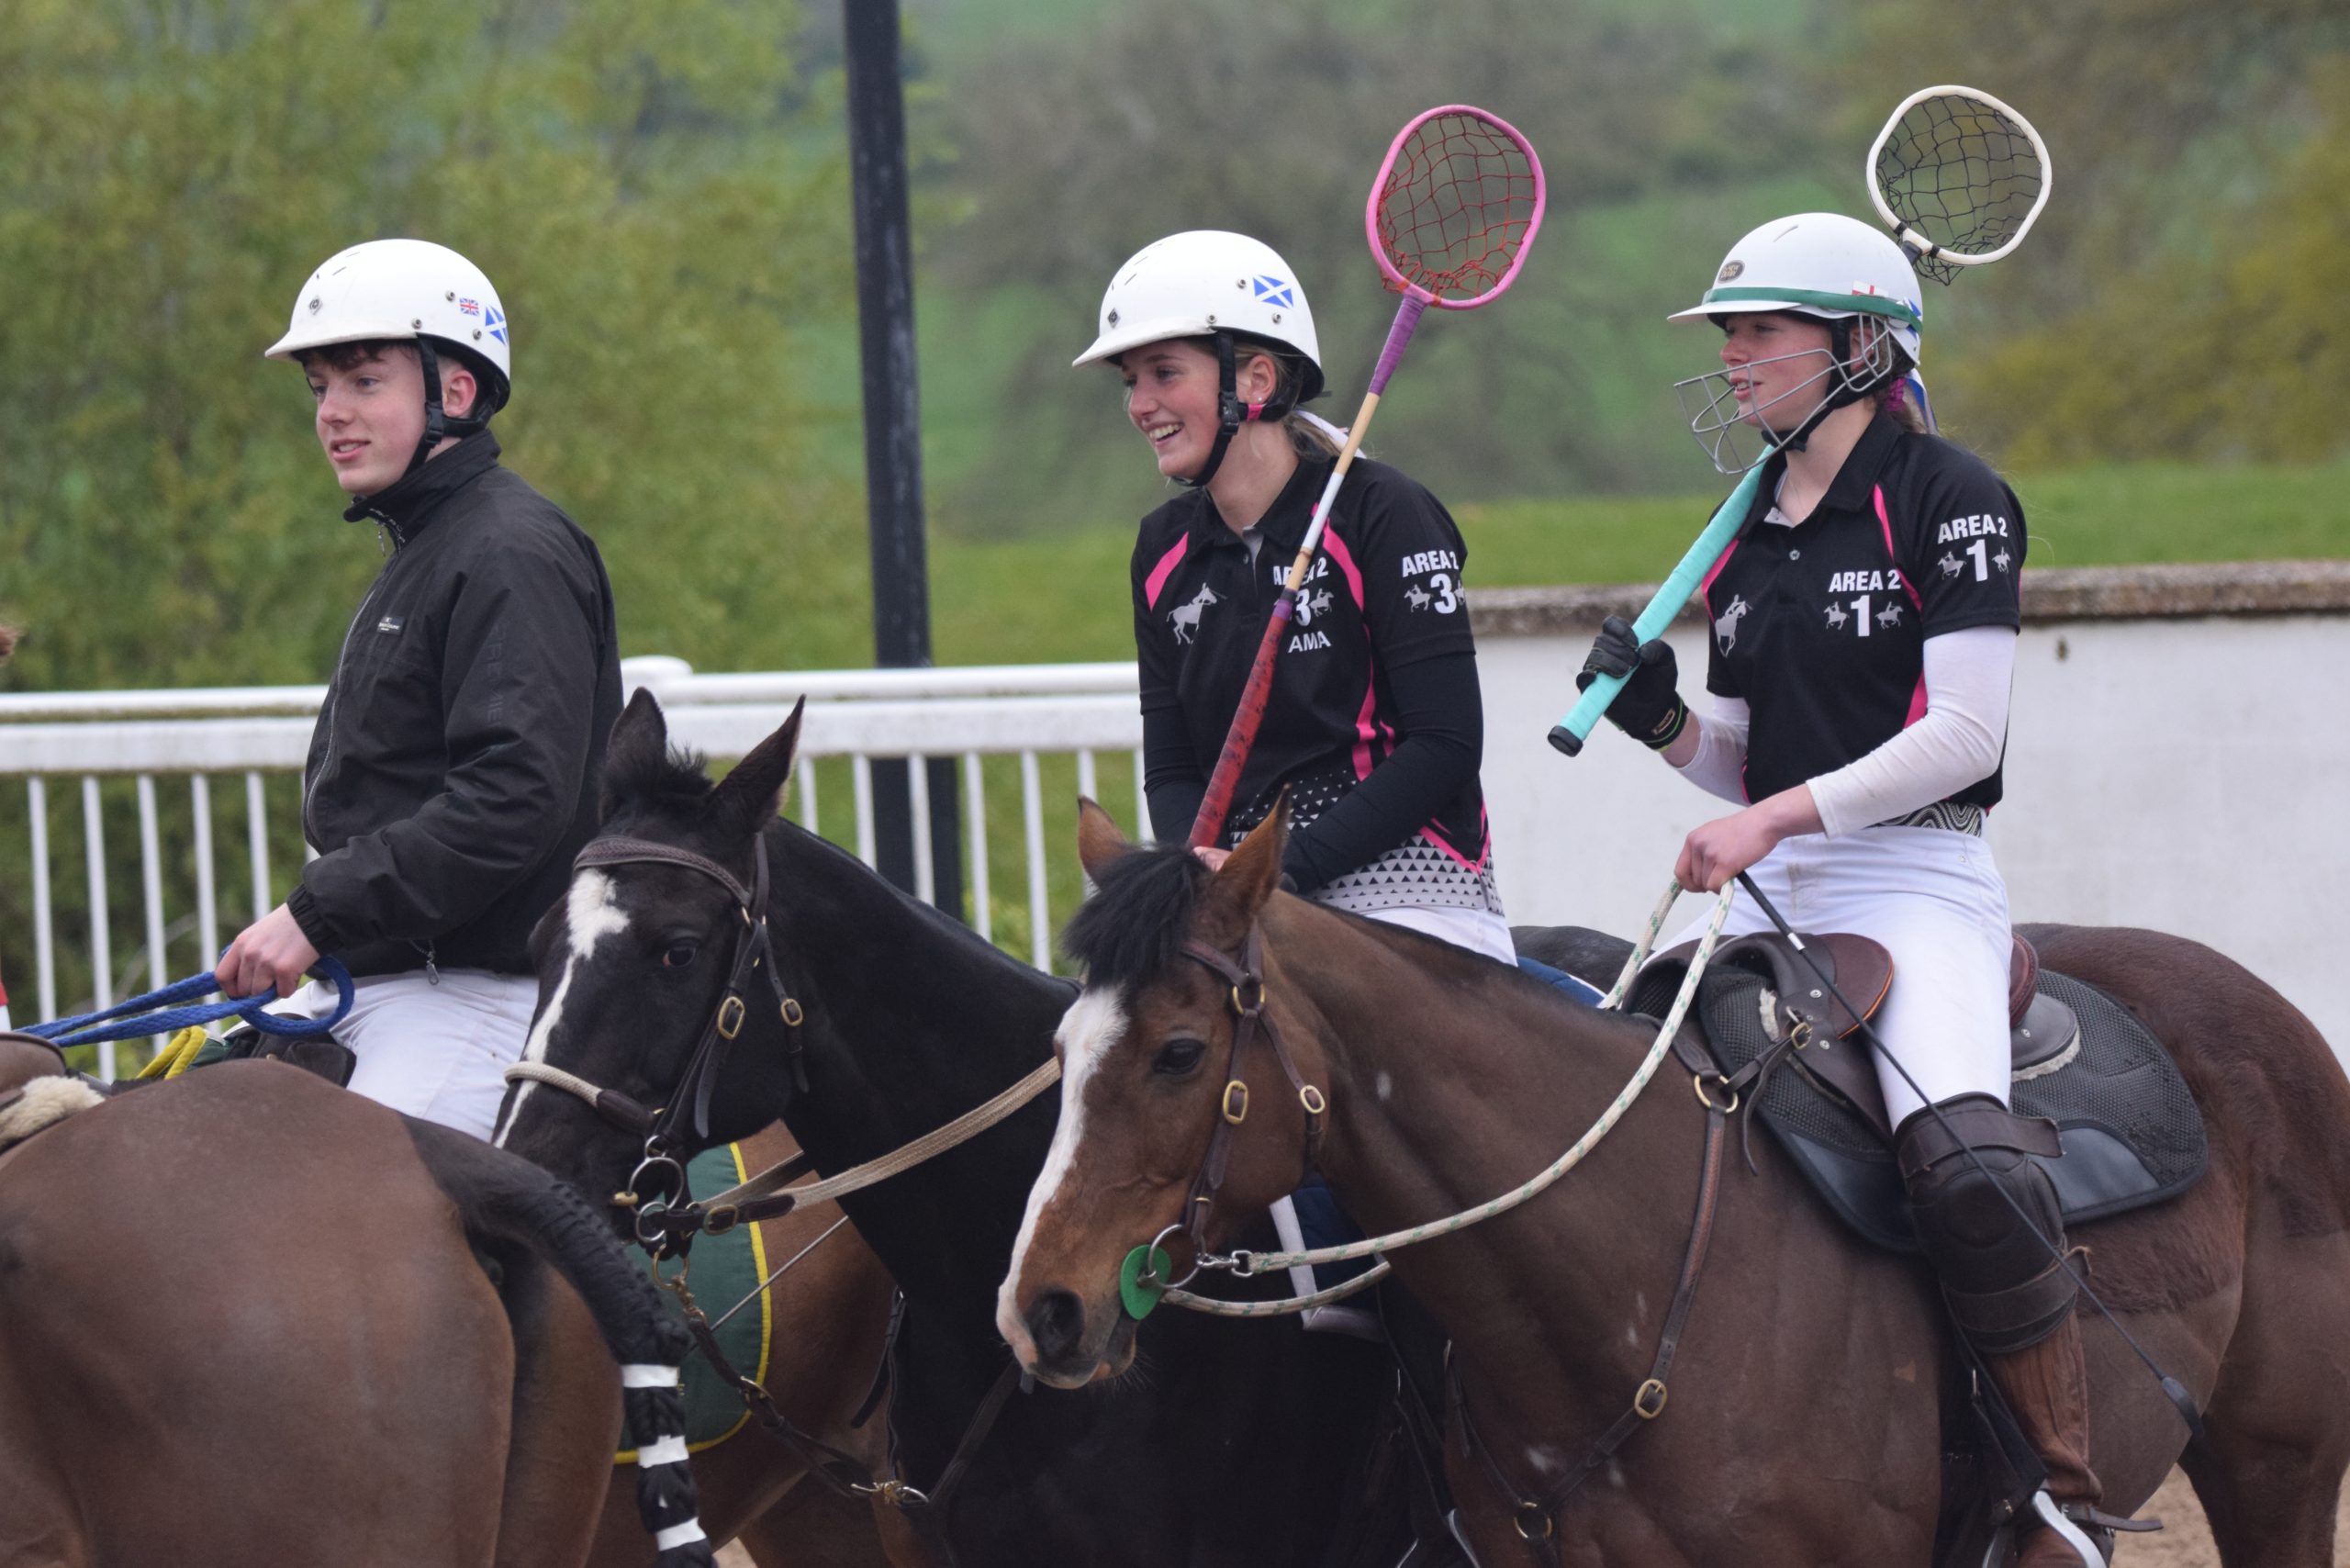 Polocrosse Arena Challenge sees showers, sunshine and smiles